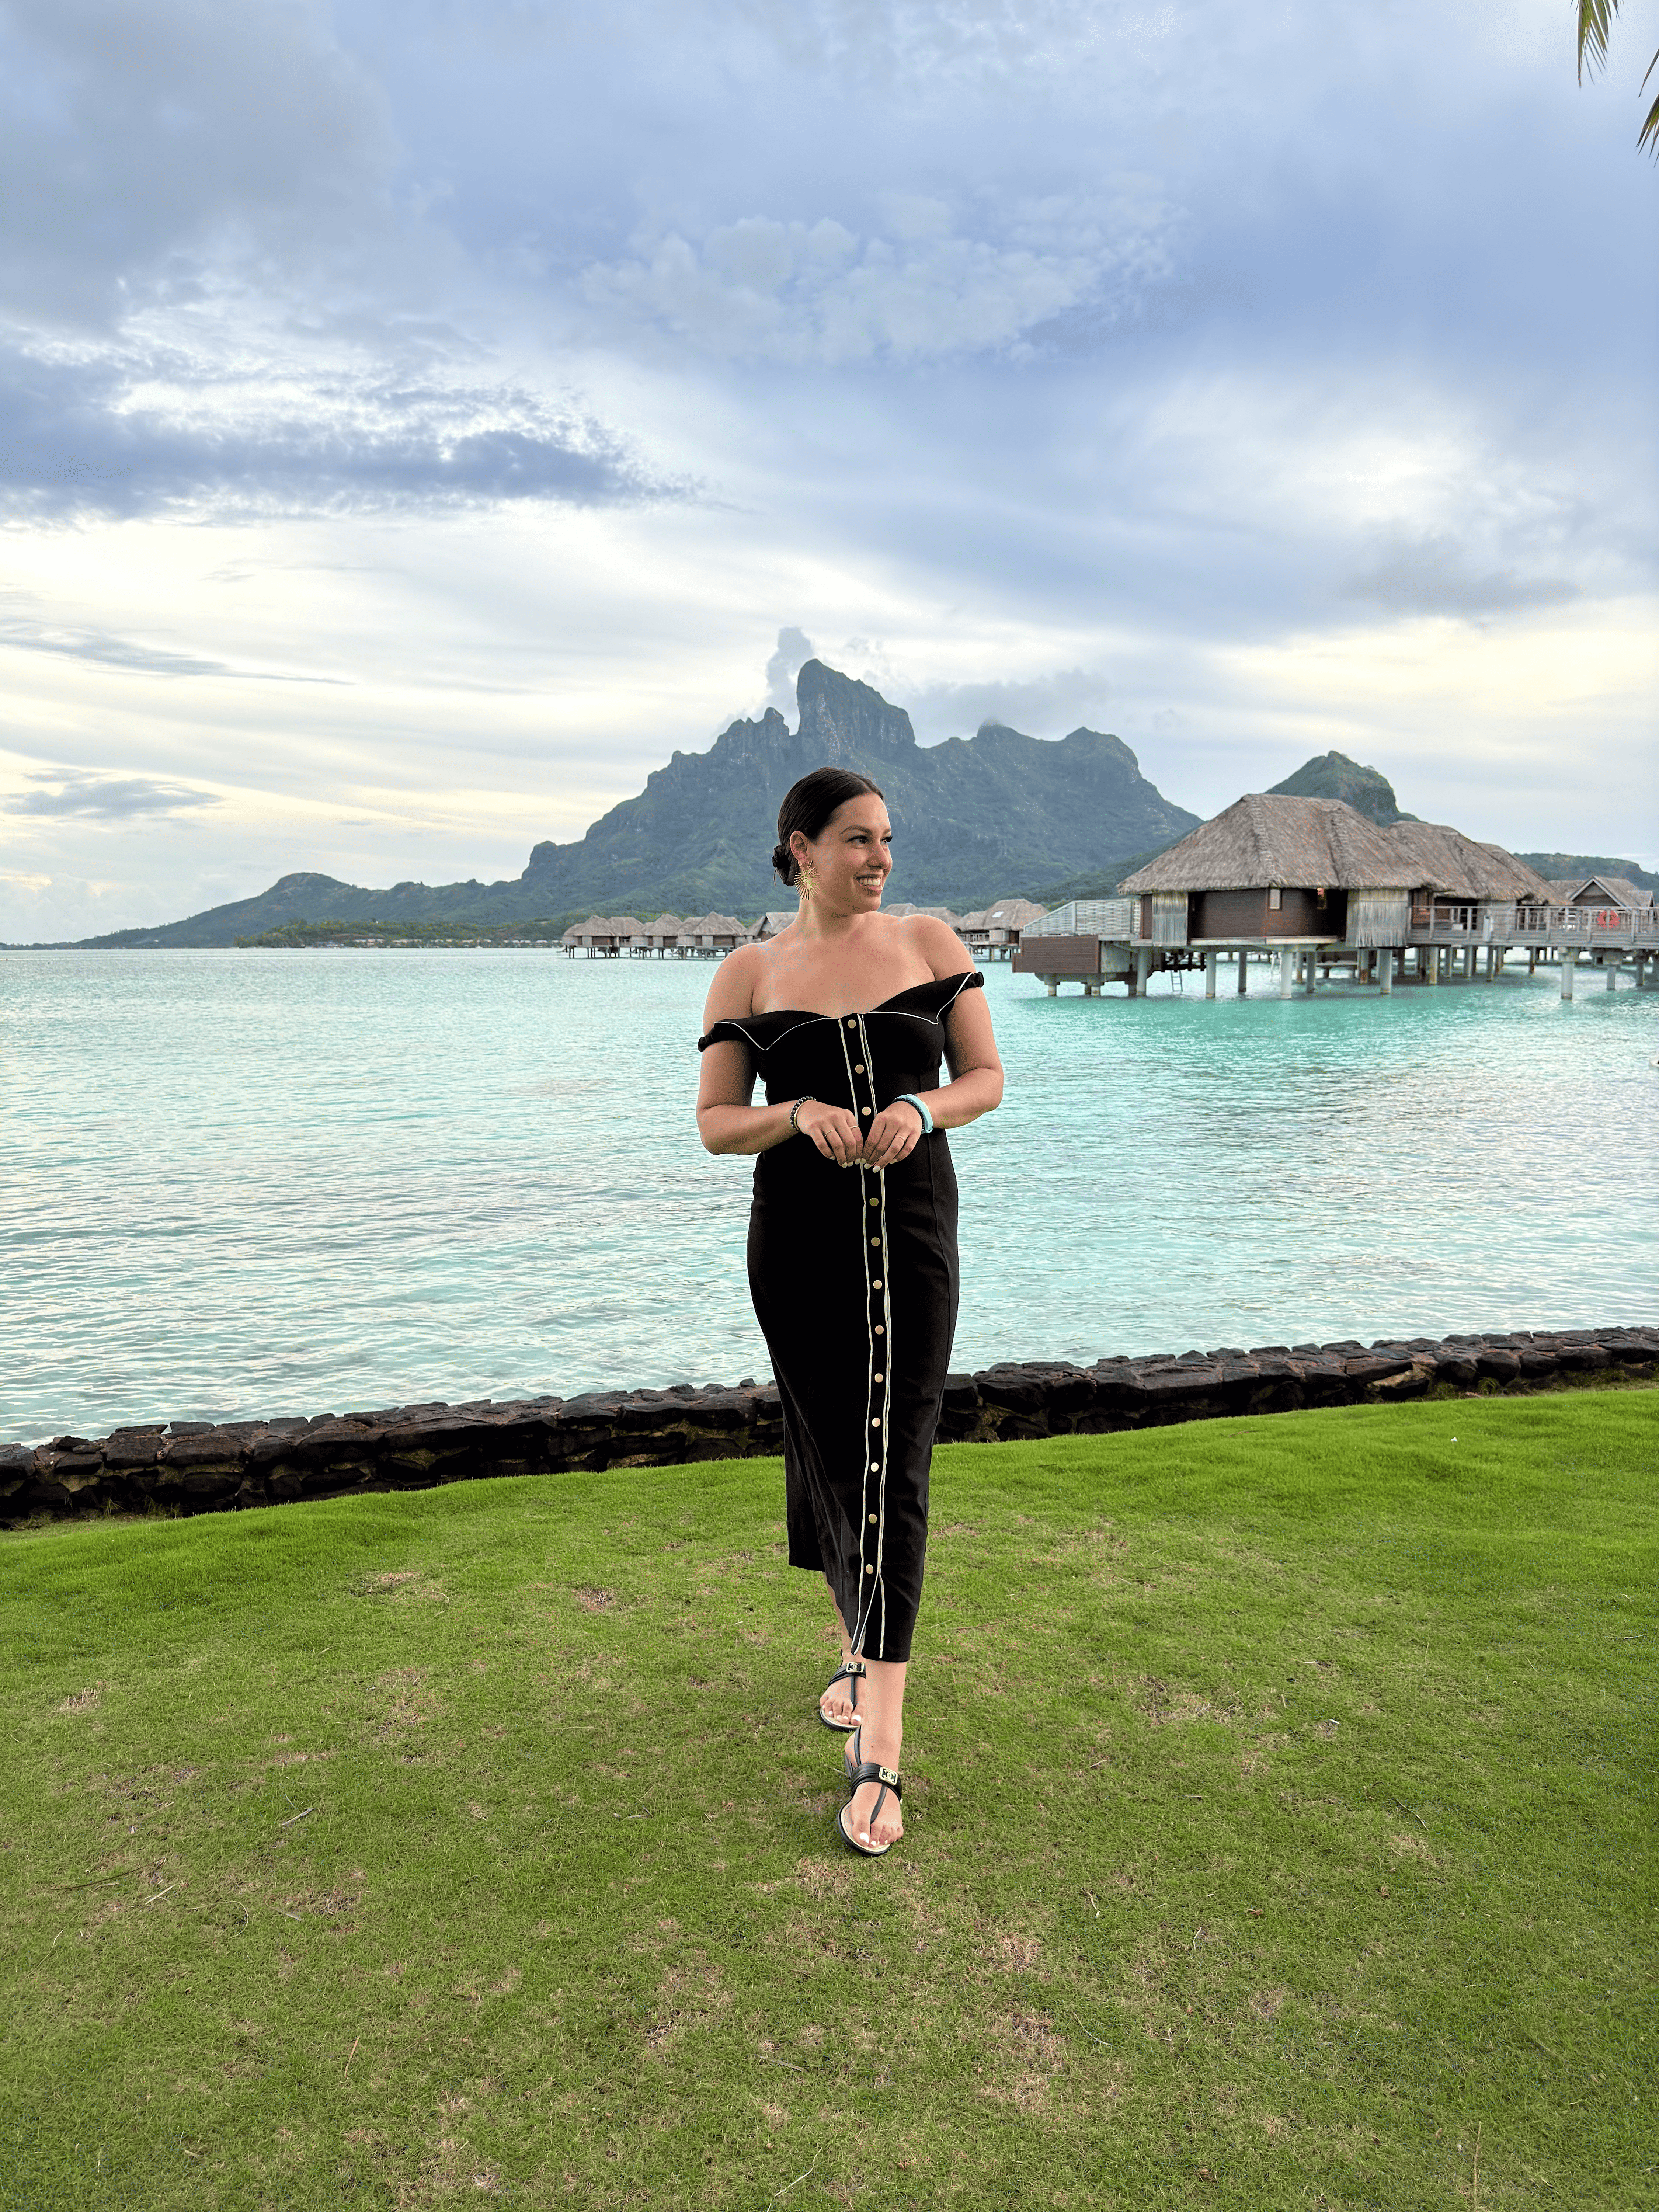 Start manifesting what you truly want. Insights from Kathrin Zenkina in Bora Bora